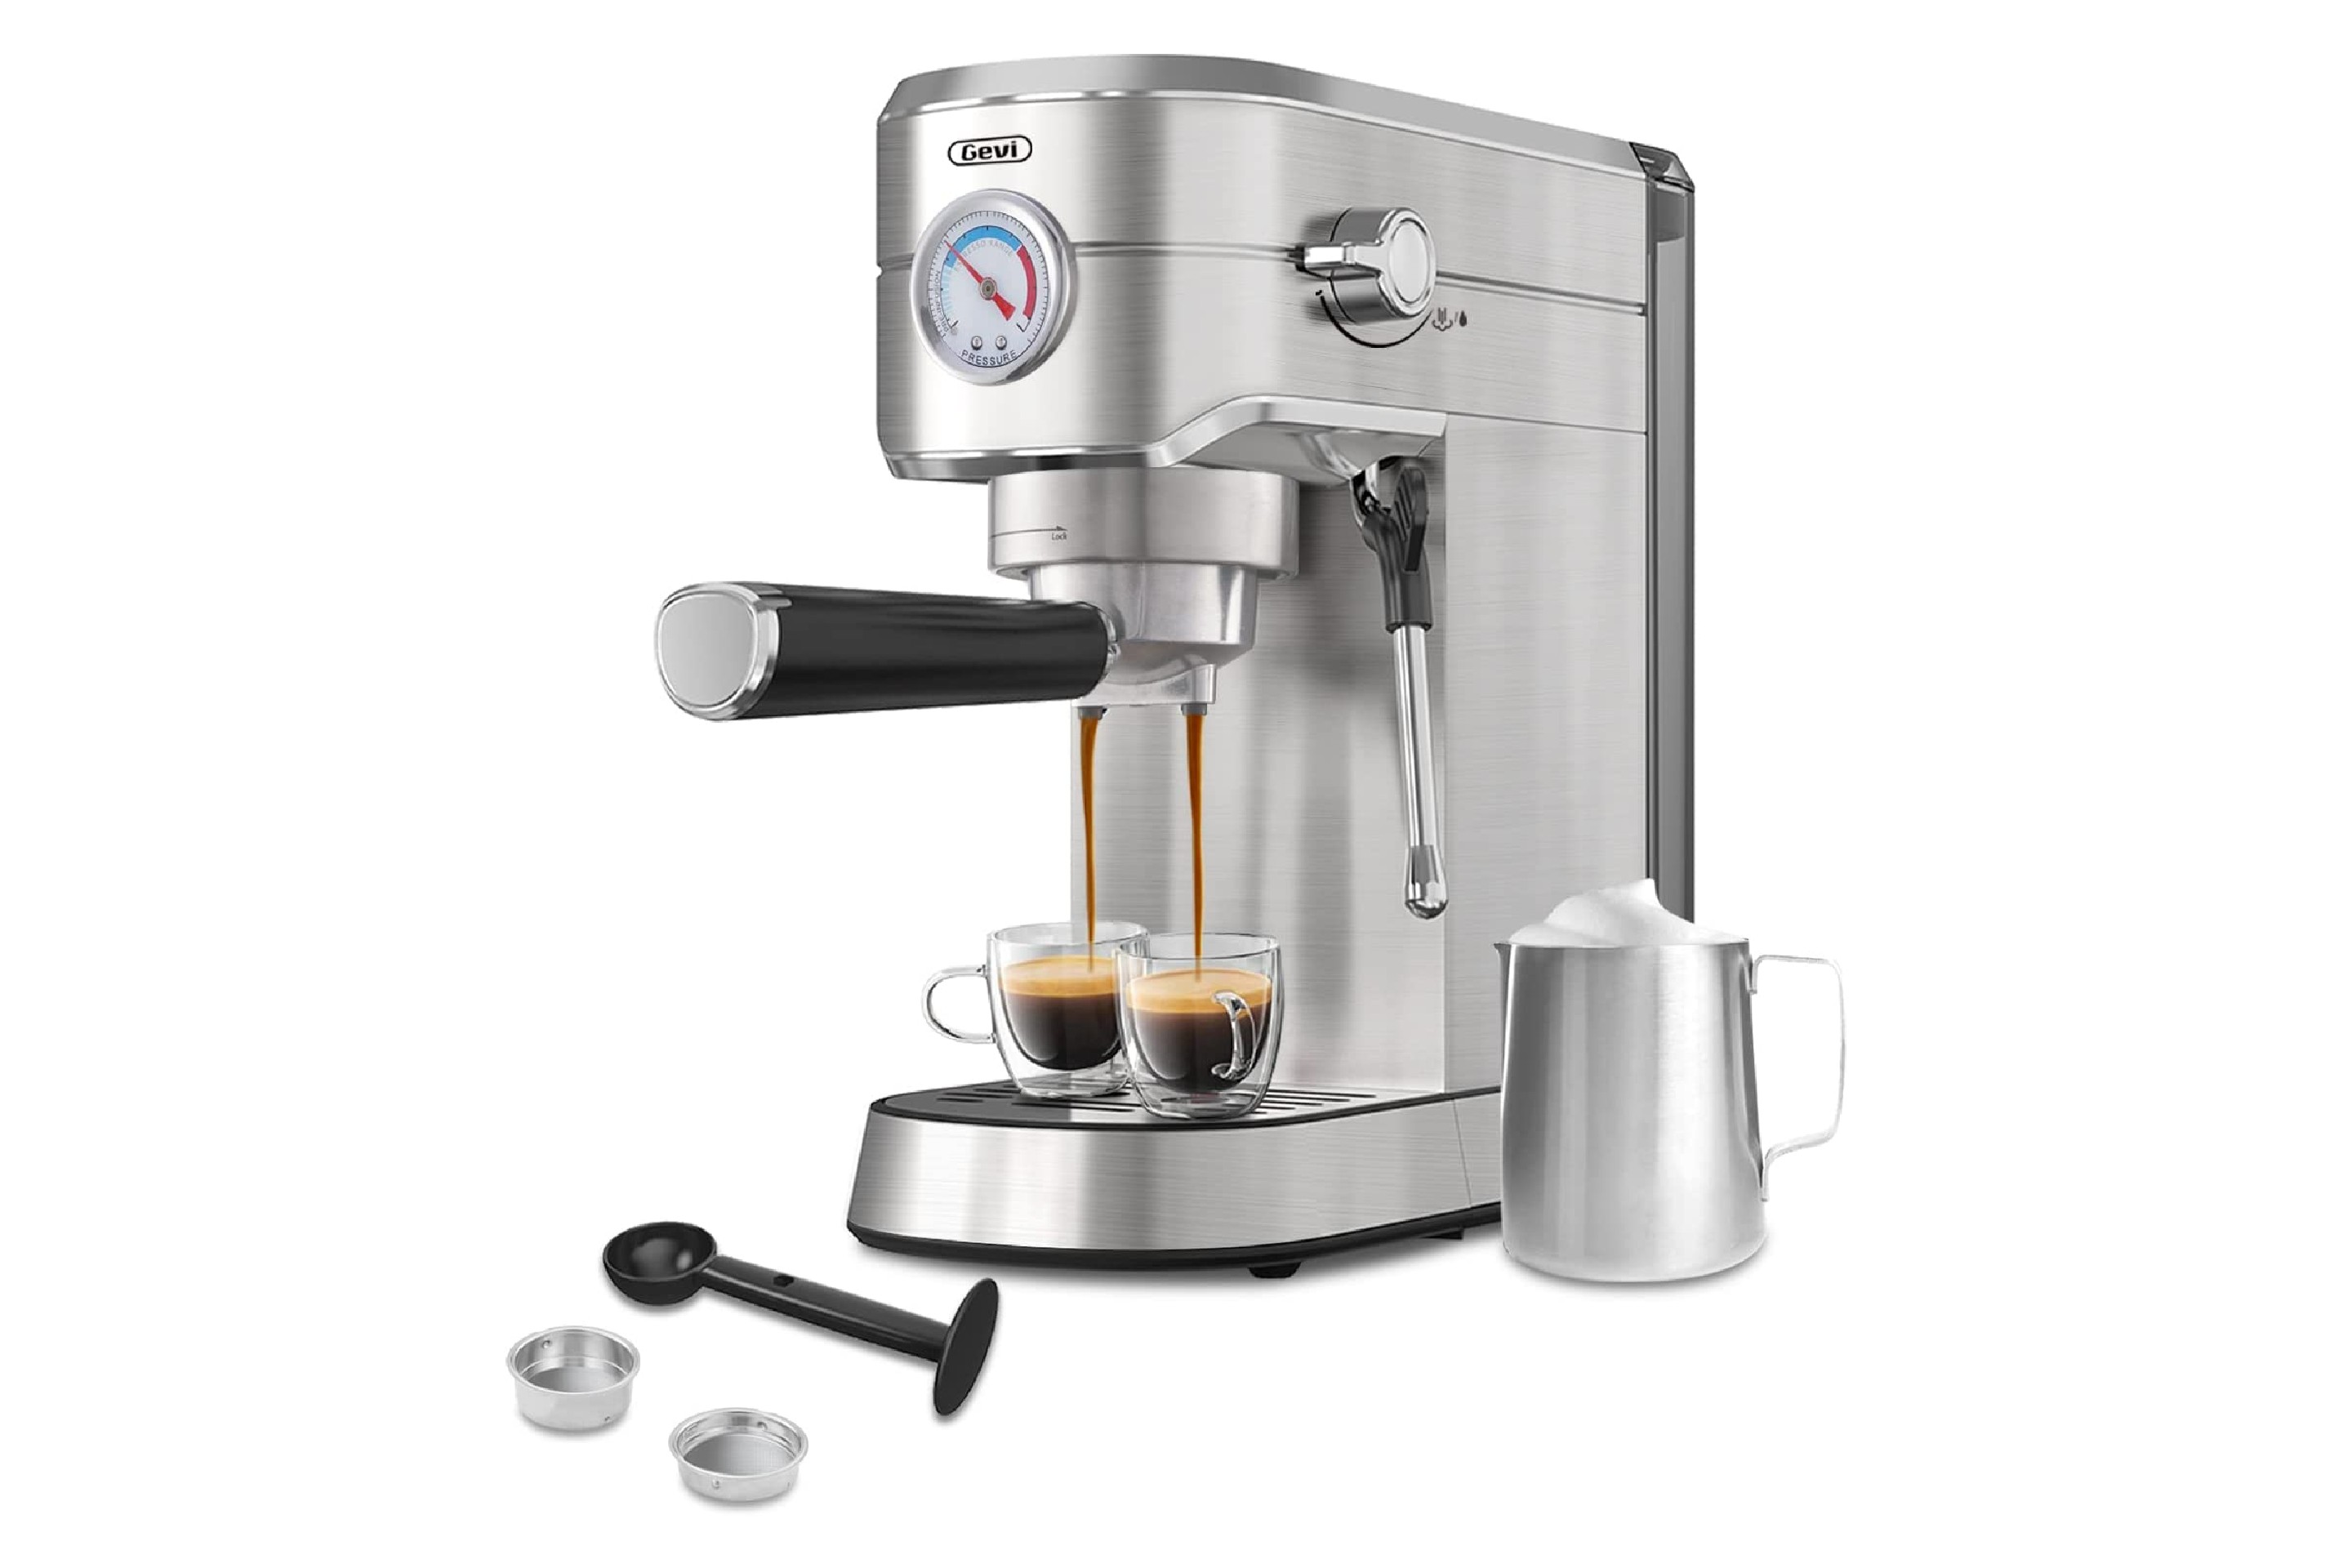 https://img.money.com/2022/12/shopping-gevi-20-bar-compact-professional-espresso-coffee-machine-with-milk-frother.jpg